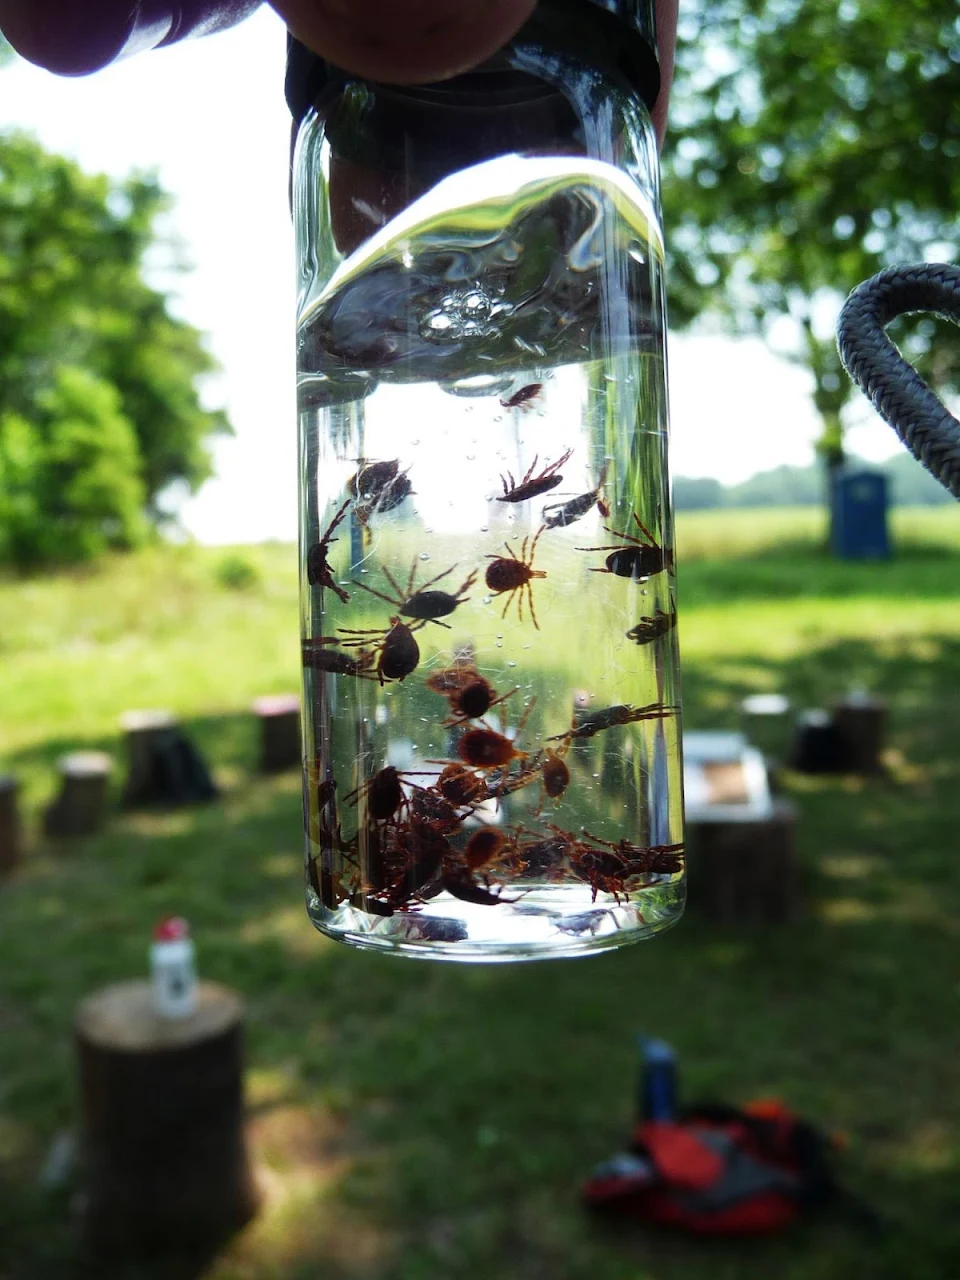 A vial of ticks from a single walk through a field during the summer